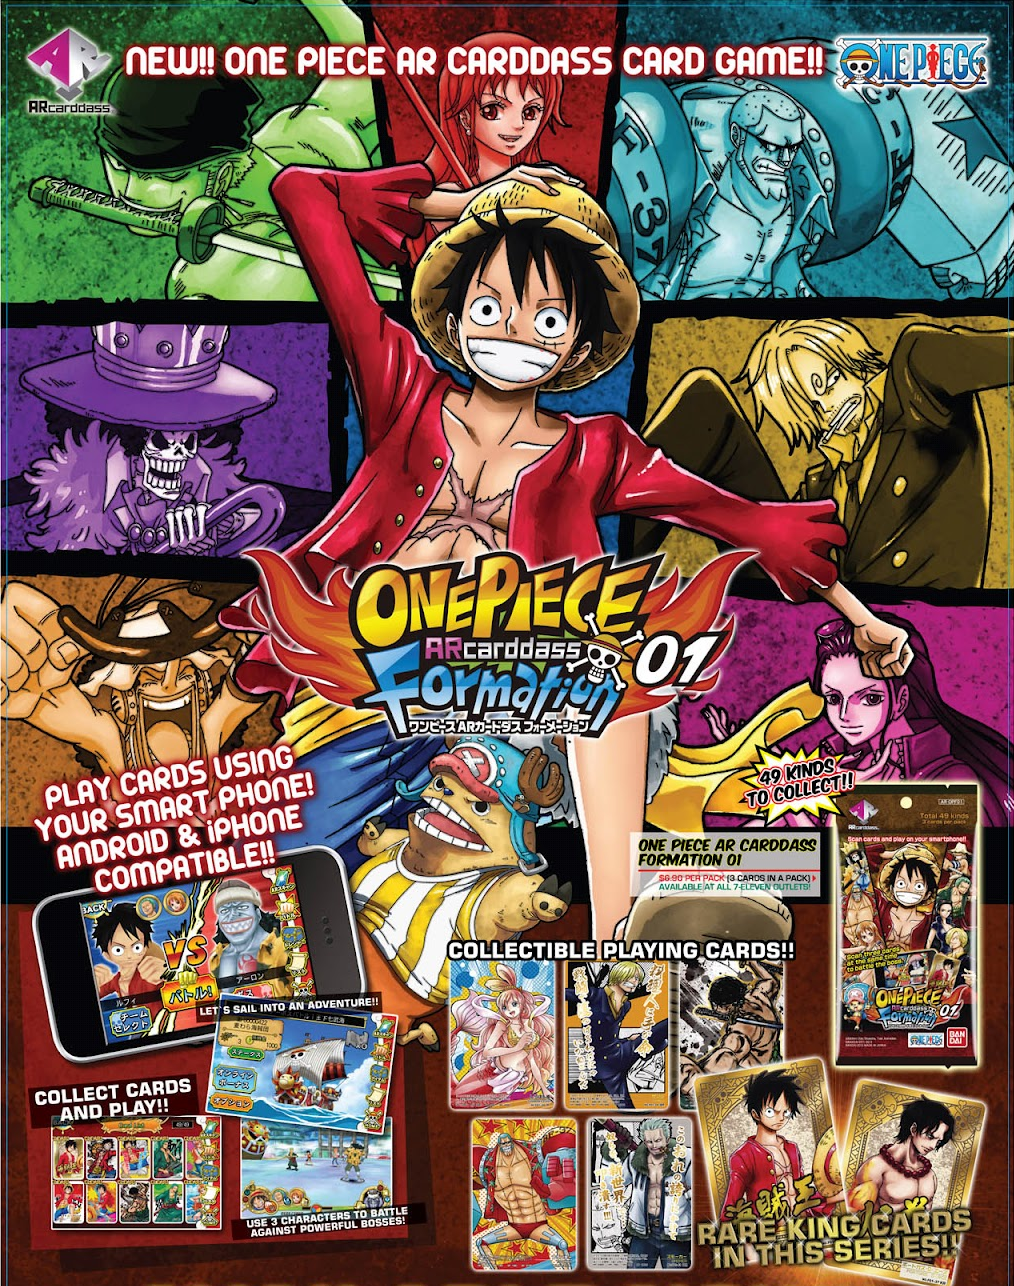 One piece miracle battle carddass op03-40 